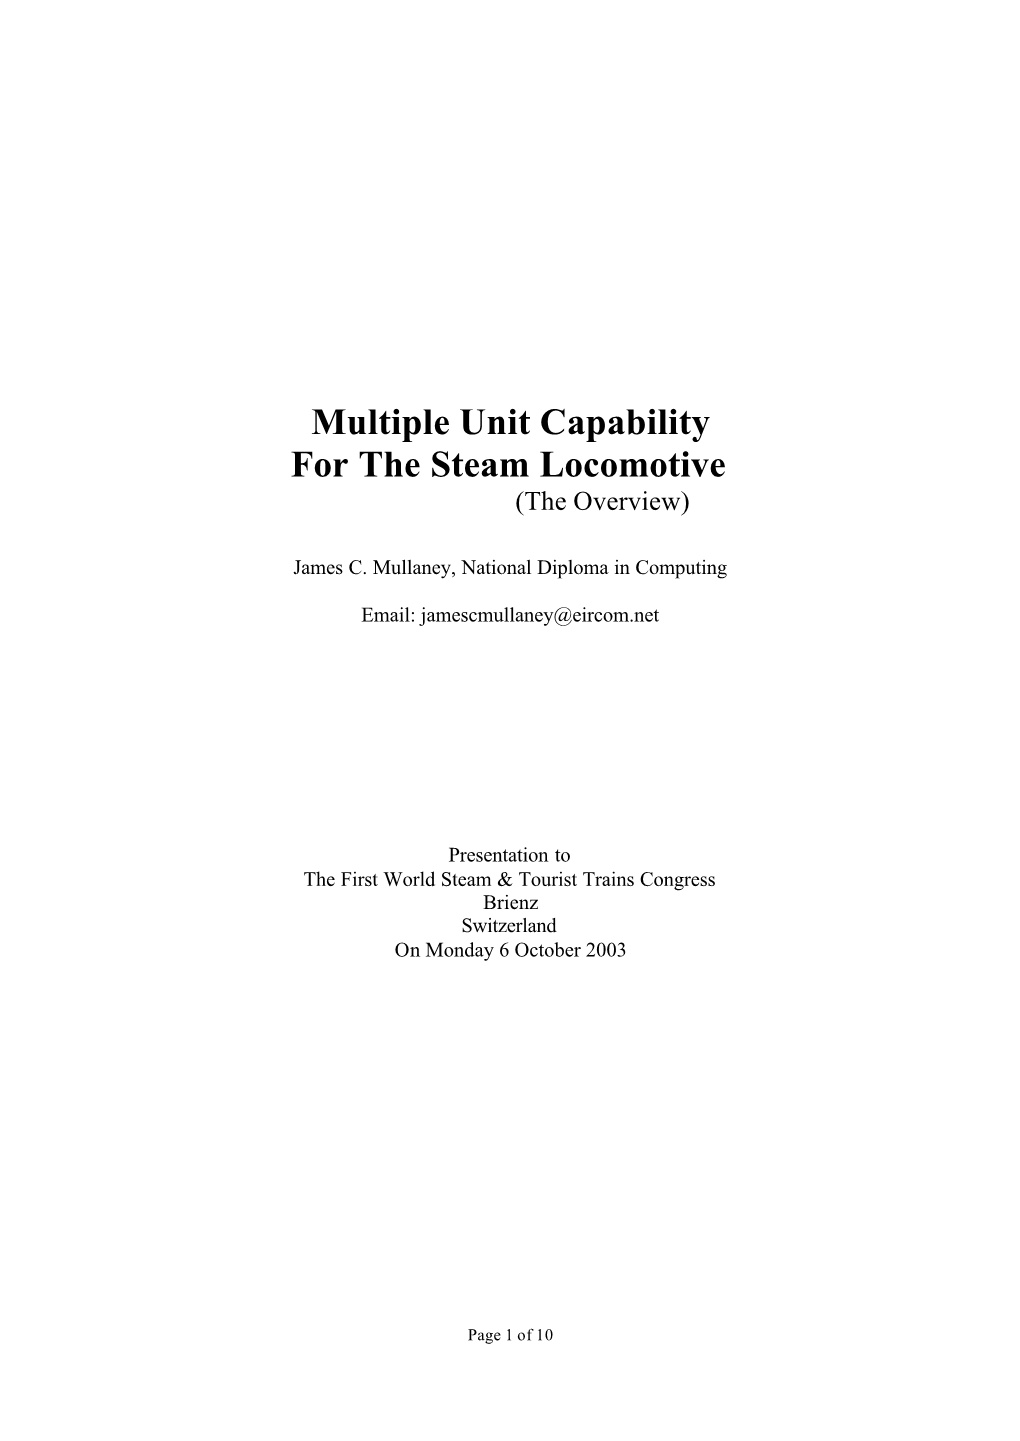 Multiple Unit Capability for the Steam Locomotive (The Overview)